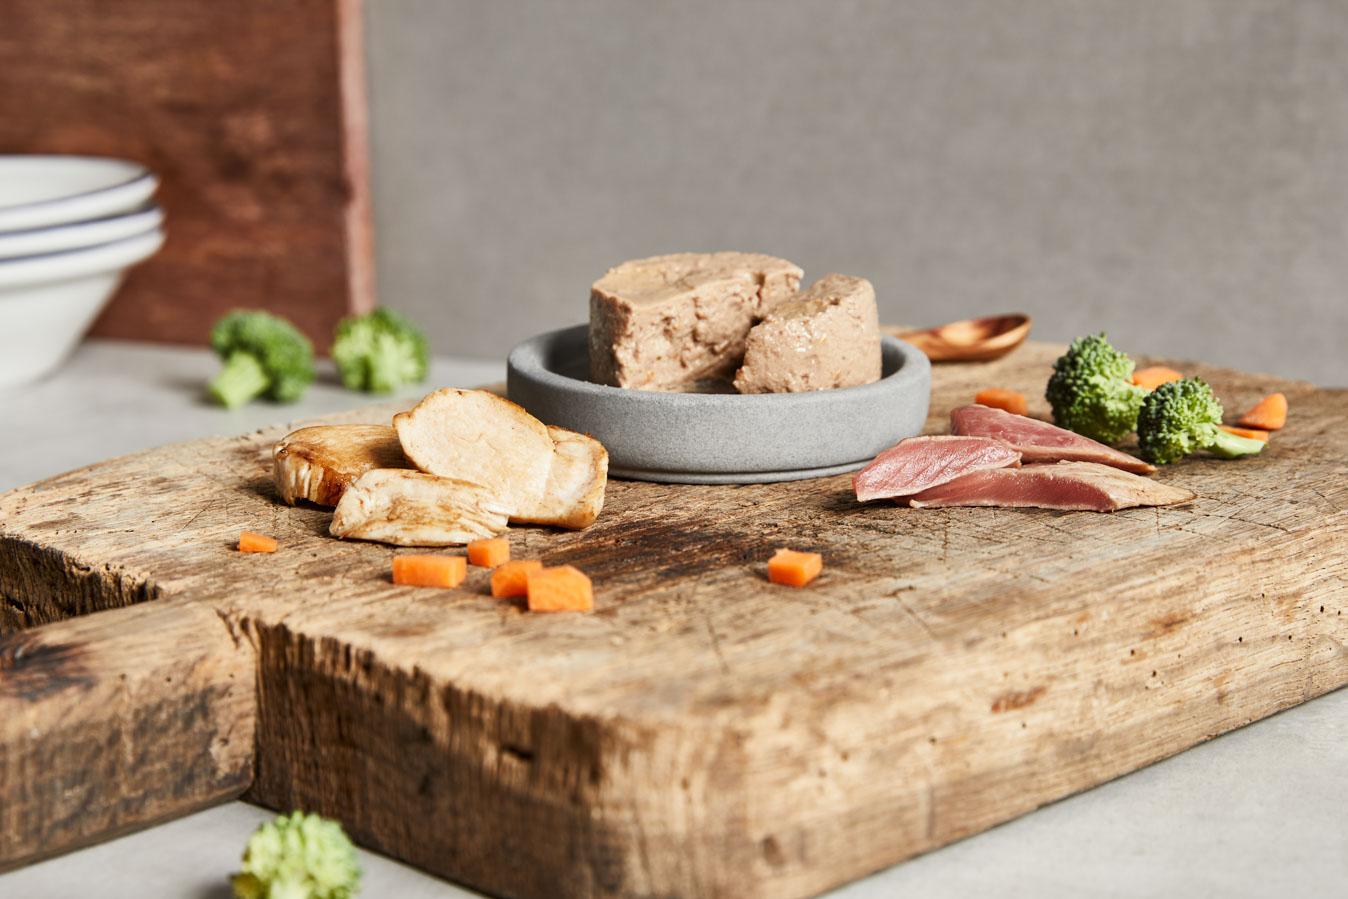 Farmers Market Meat Centre - Tuna Mousse with Chicken Centre, Carrot & Broccoli 80g